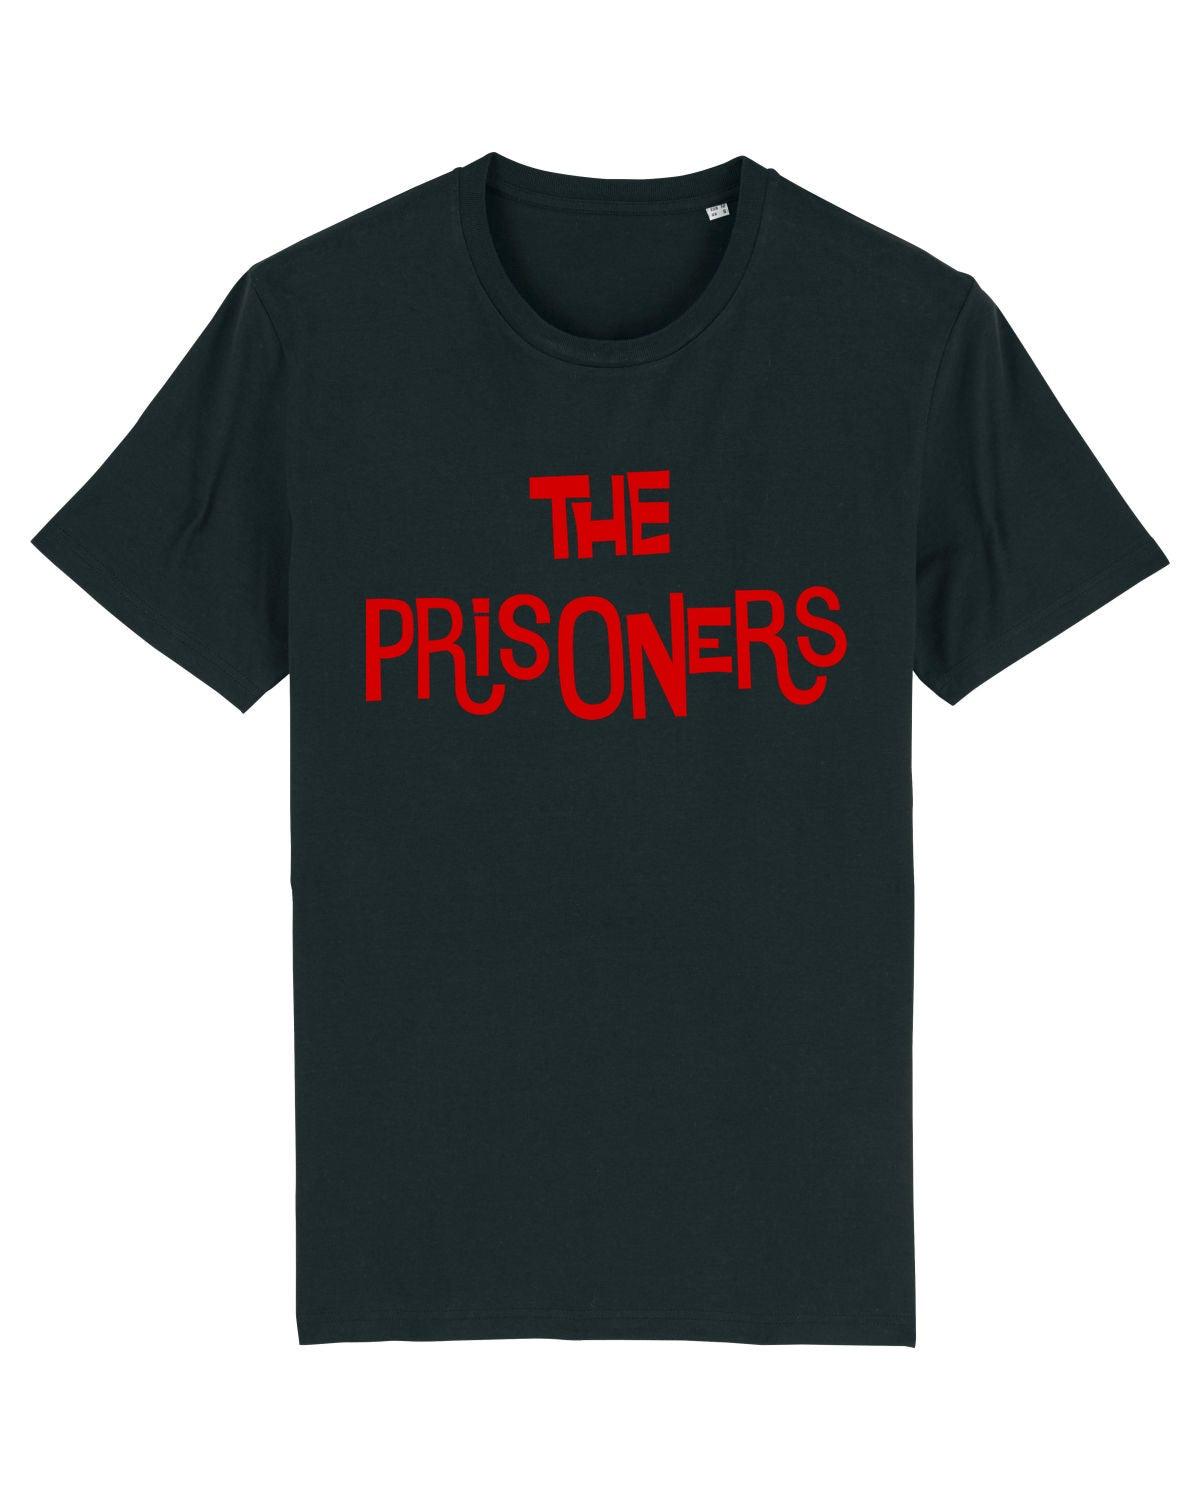 THE PRISONERS: Reunion Logo RED: T-Shirt Official Merchandise by Sound is Colour. - SOUND IS COLOUR